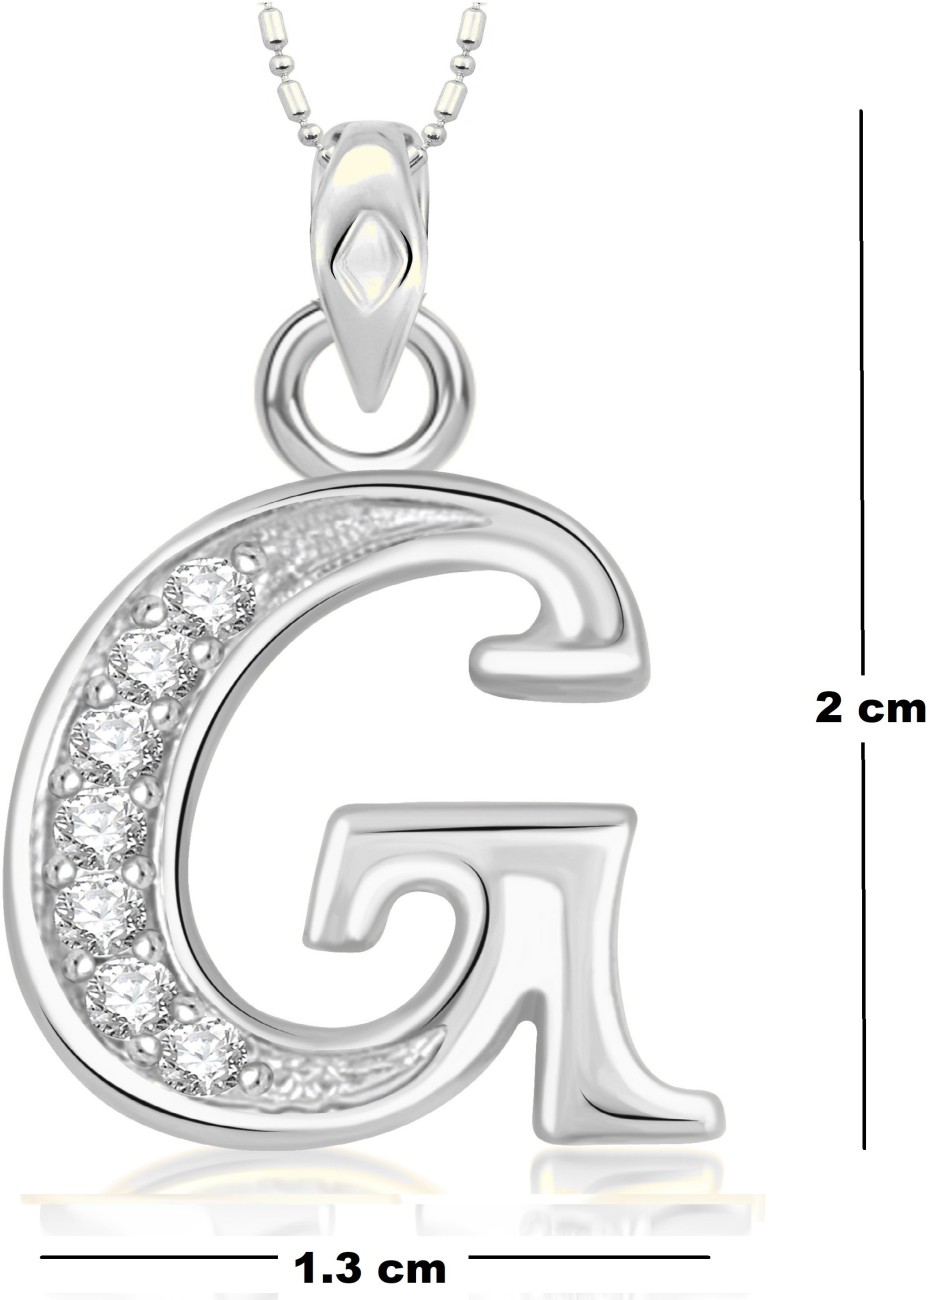 Vshine Alphabet Y Pendant initial Letter American Diamond Studded Pendant Locket with Silver Chain Rhodium Silver Plated Stylish Fancy Latest Design